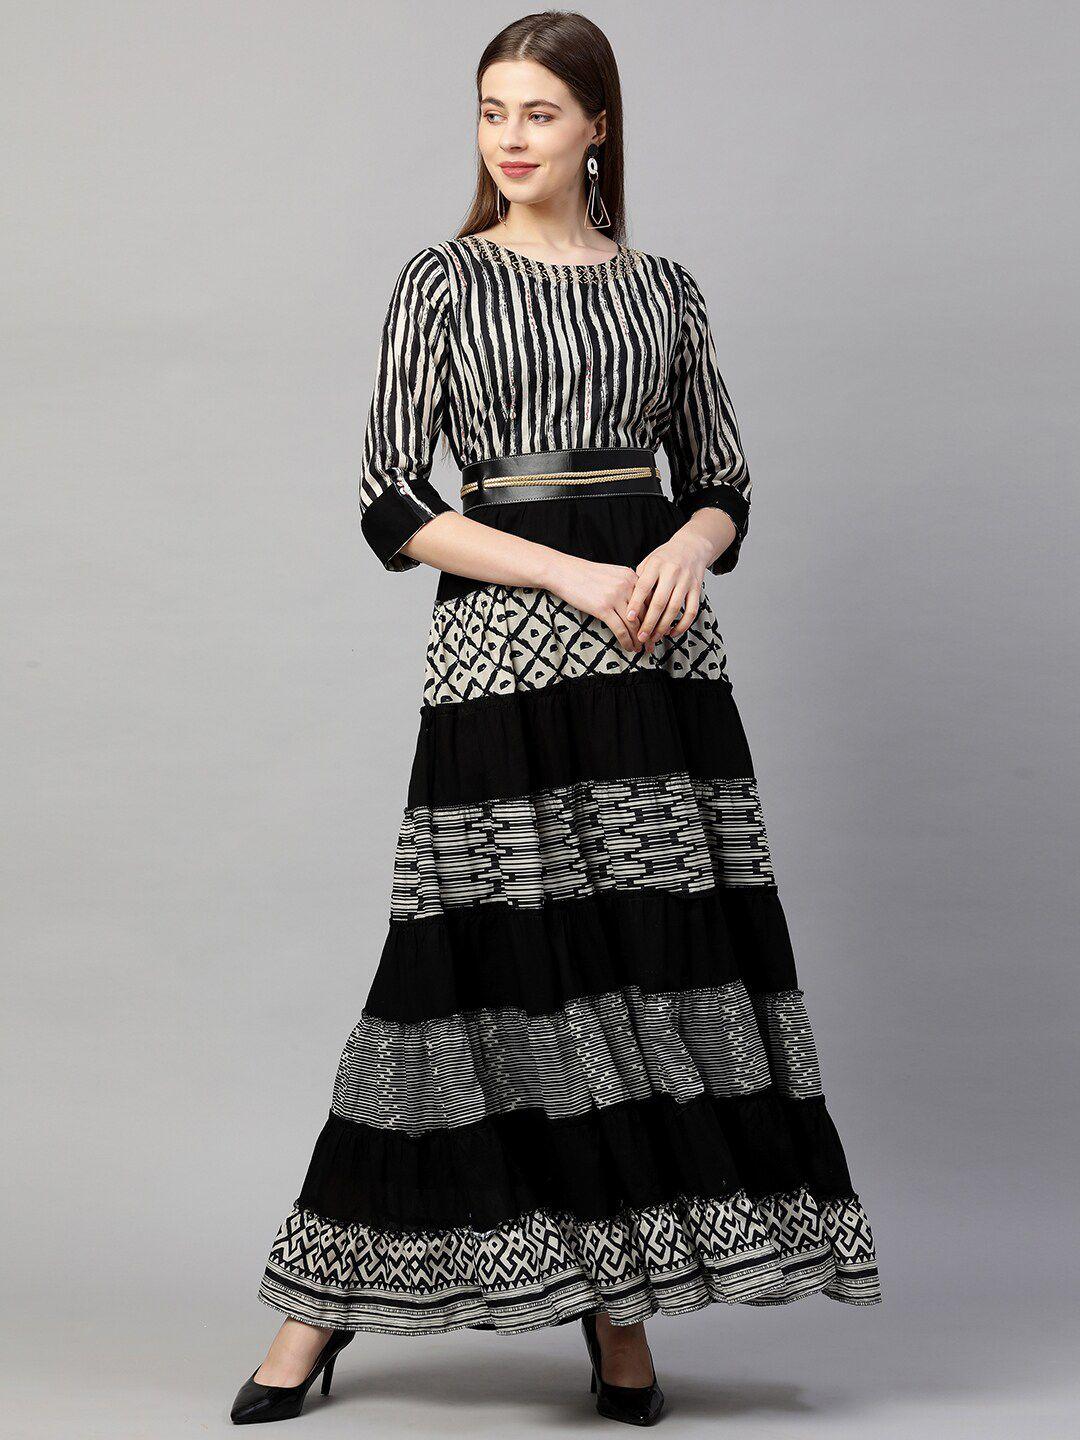 fashor black & beige striped tiered ethnic maxi dress with leather belt